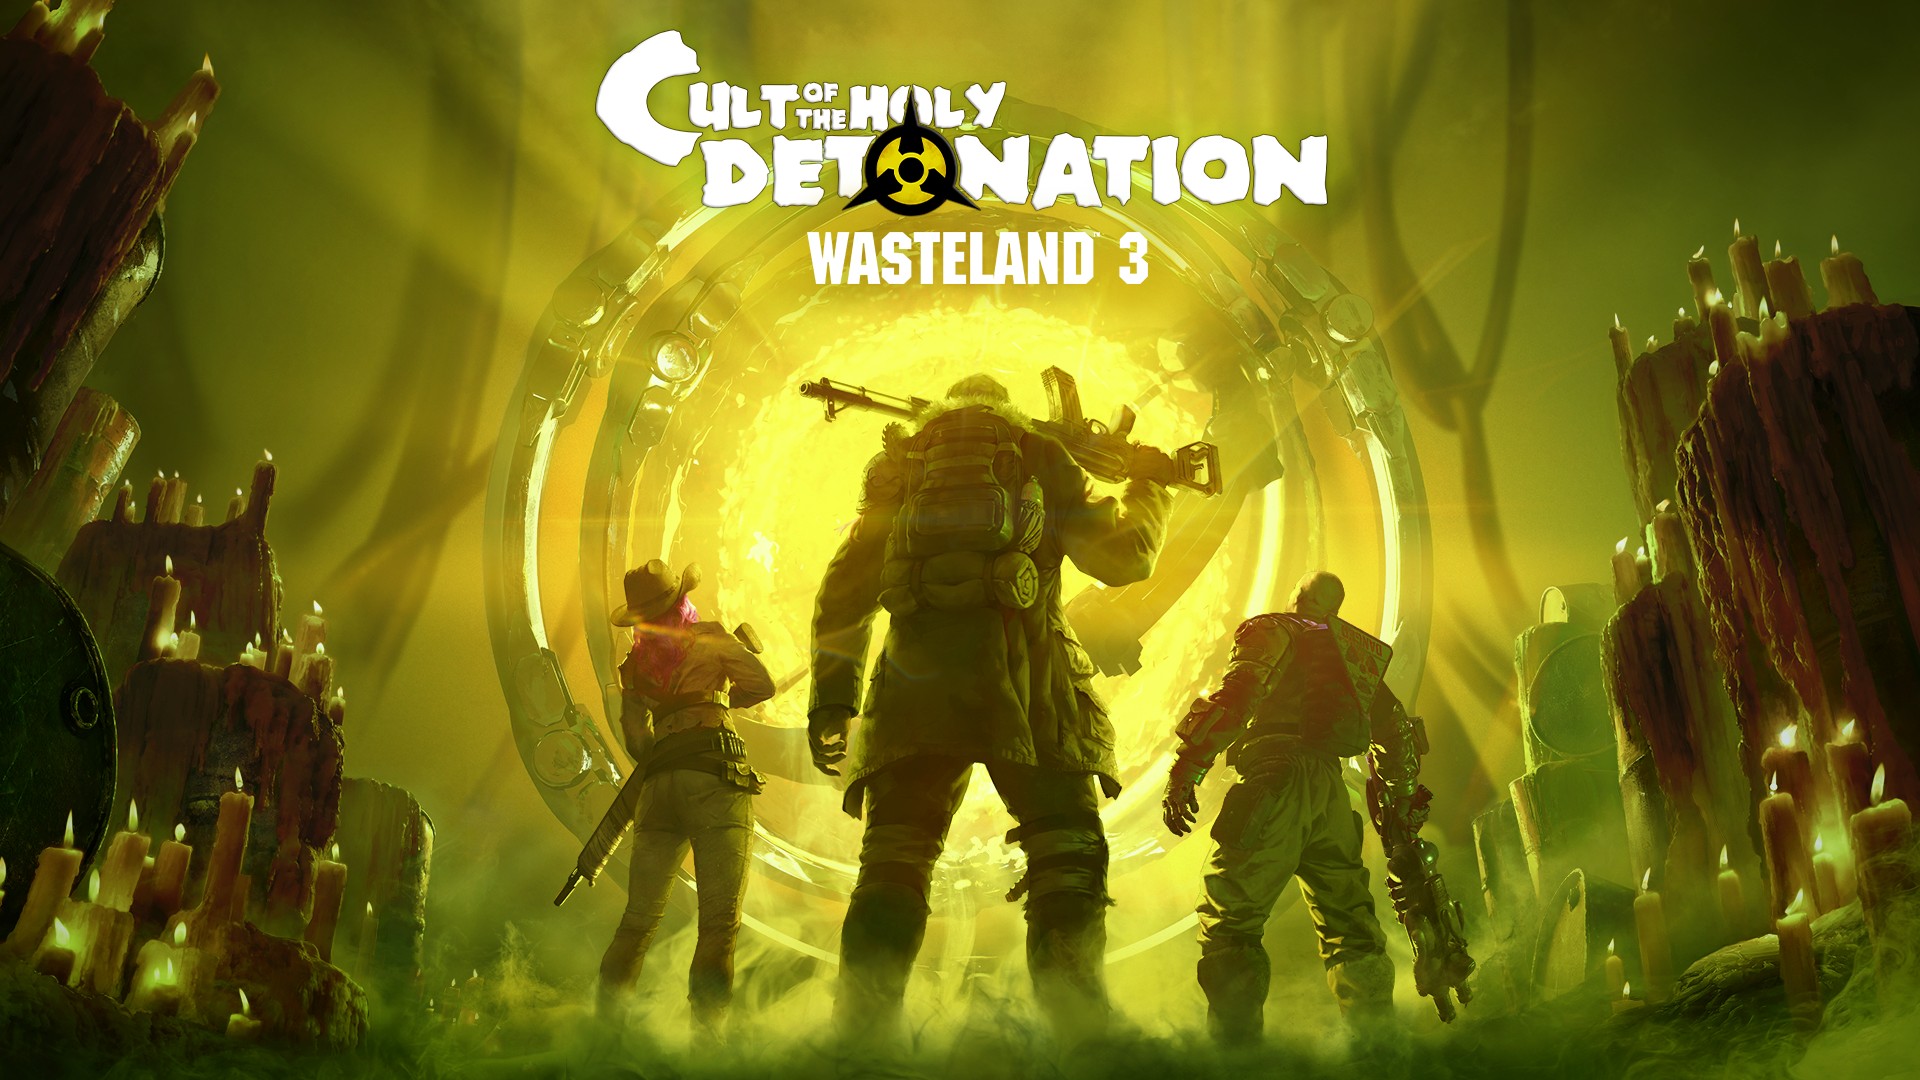 Wasteland 3 DLC ‘Cult of the Holy Detonation’ Now Available On PC, Xbox One & Playstation 4